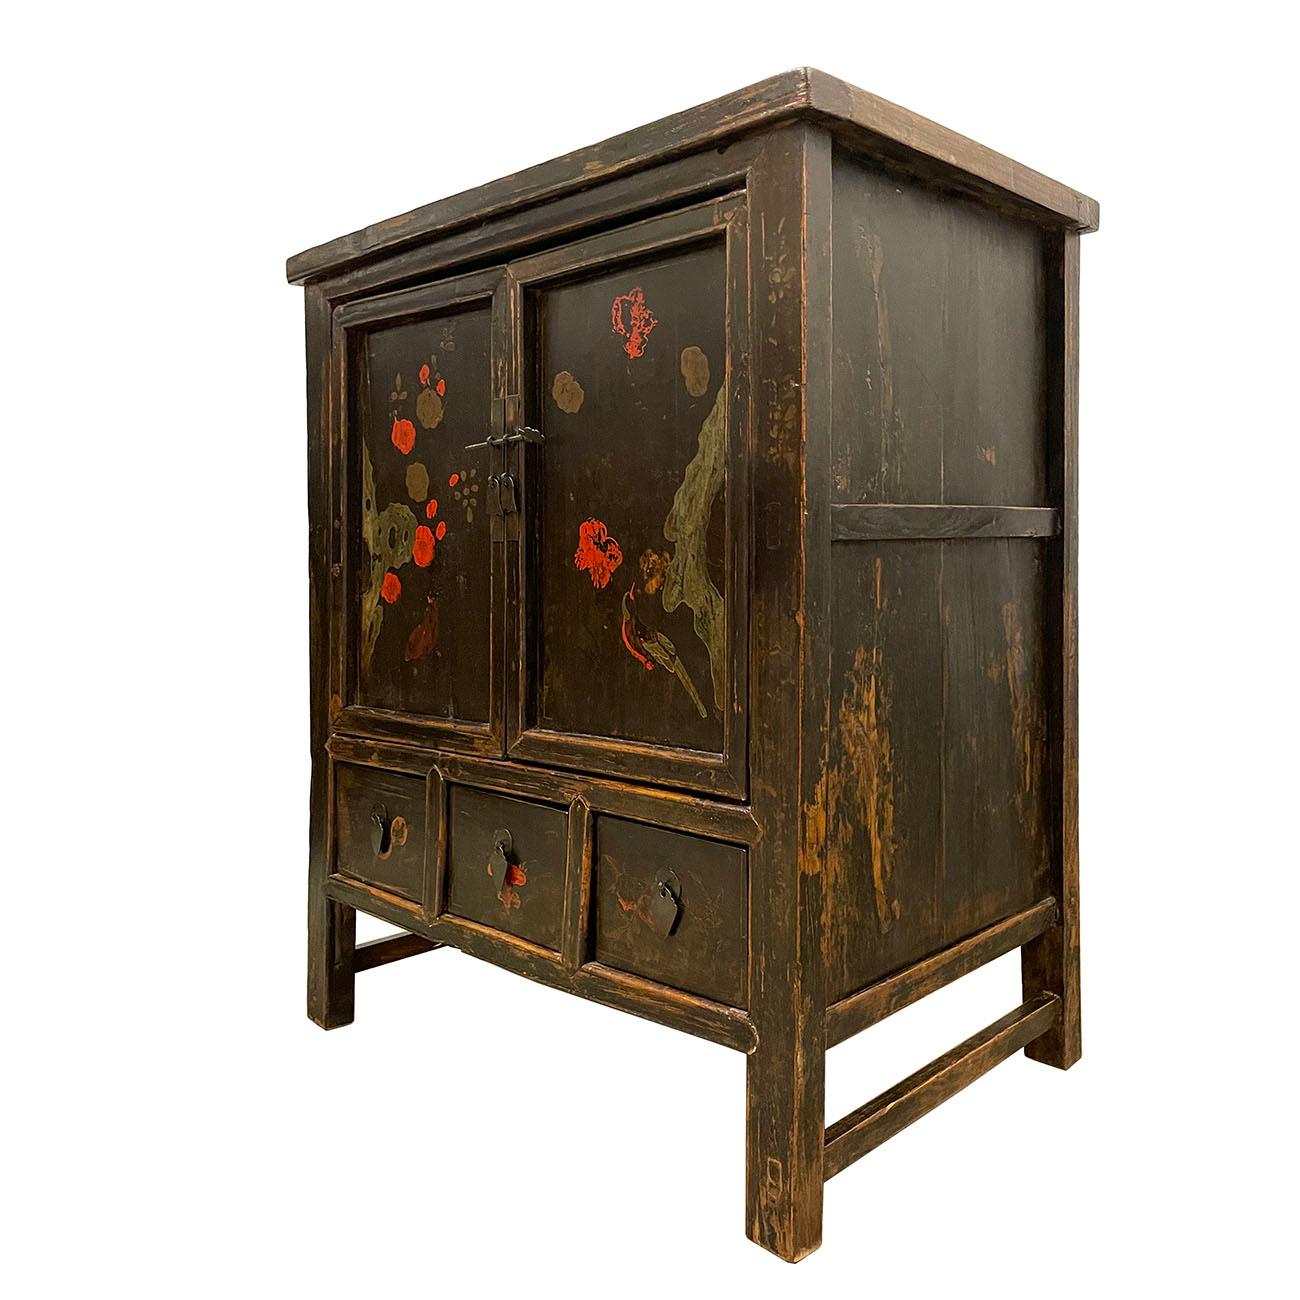 What a find! This is an unique Chinese antique cabinet. It features 2 removable open doors with antique copper hardware on the front and three drawers at bottom. There is one shelf inside cabinet. This cabinet has some beautiful painting work of